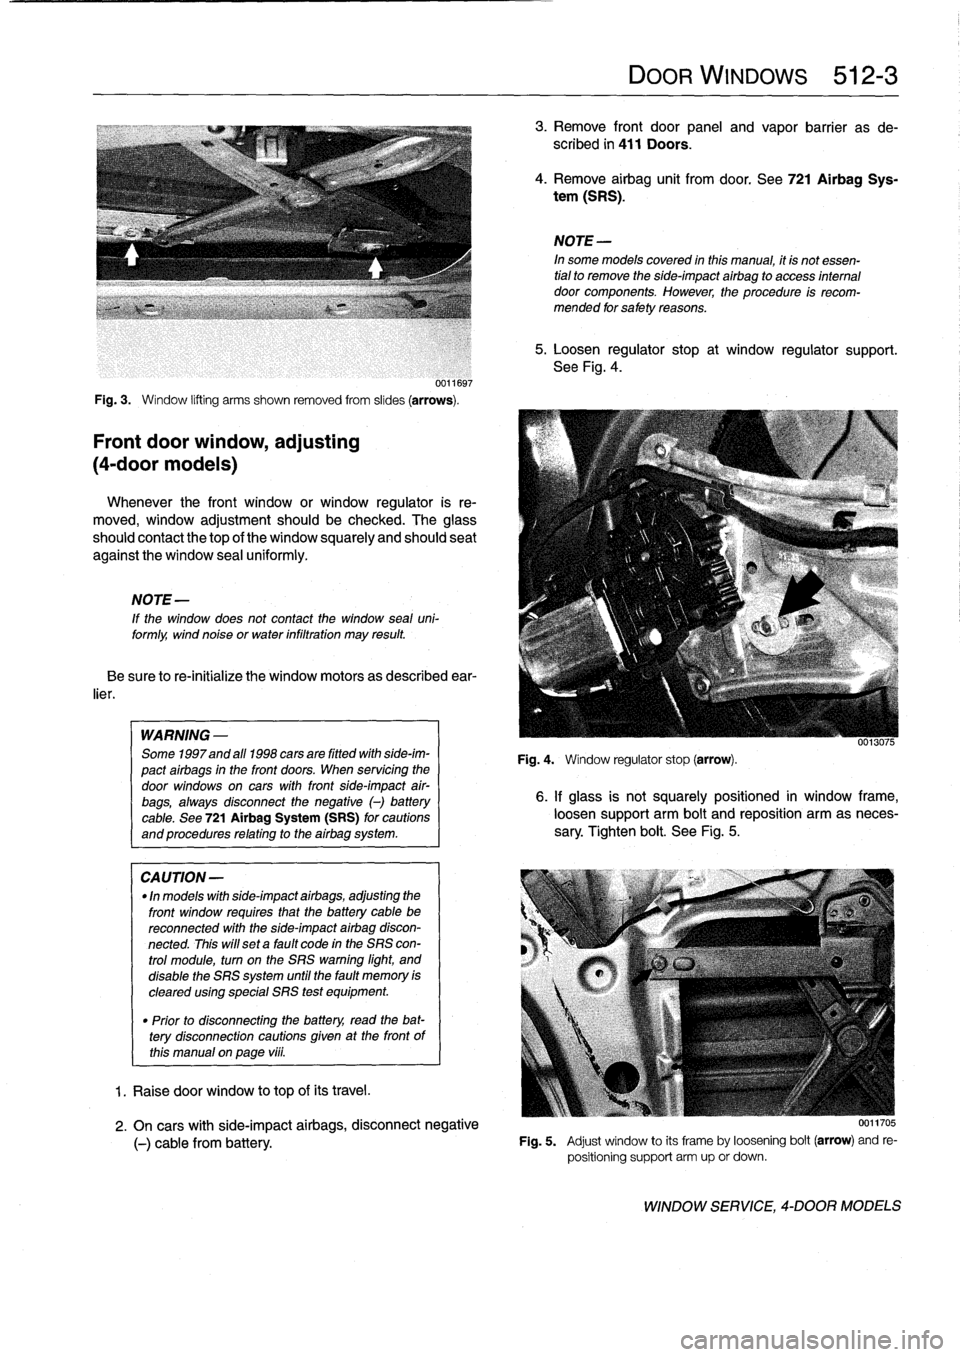 BMW 328i 1995 E36 Workshop Manual 
0011697

Fig
.
3
.

	

Window
lifting
arms
shown
removed
from
slides
(arrows)
.

Front
door
window,
adjusting

(4-door
models)

Whenever
the
front
window
or
window
regulator
is
re-

moved,
window
adj